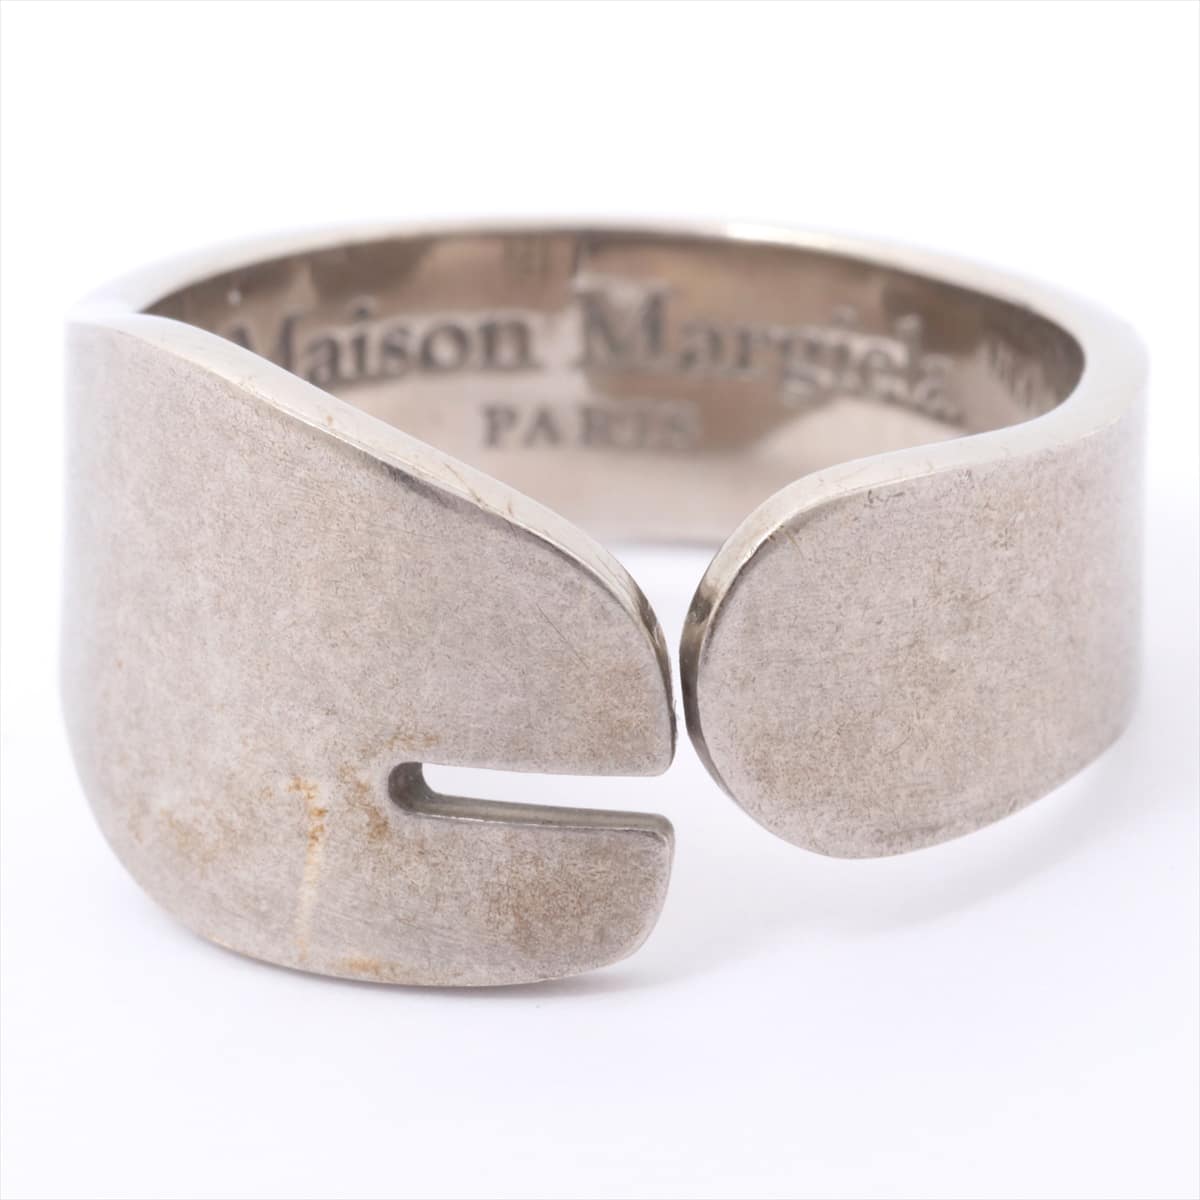 Maison Margiela rings 925 Silver There is a tag Tabi tabi